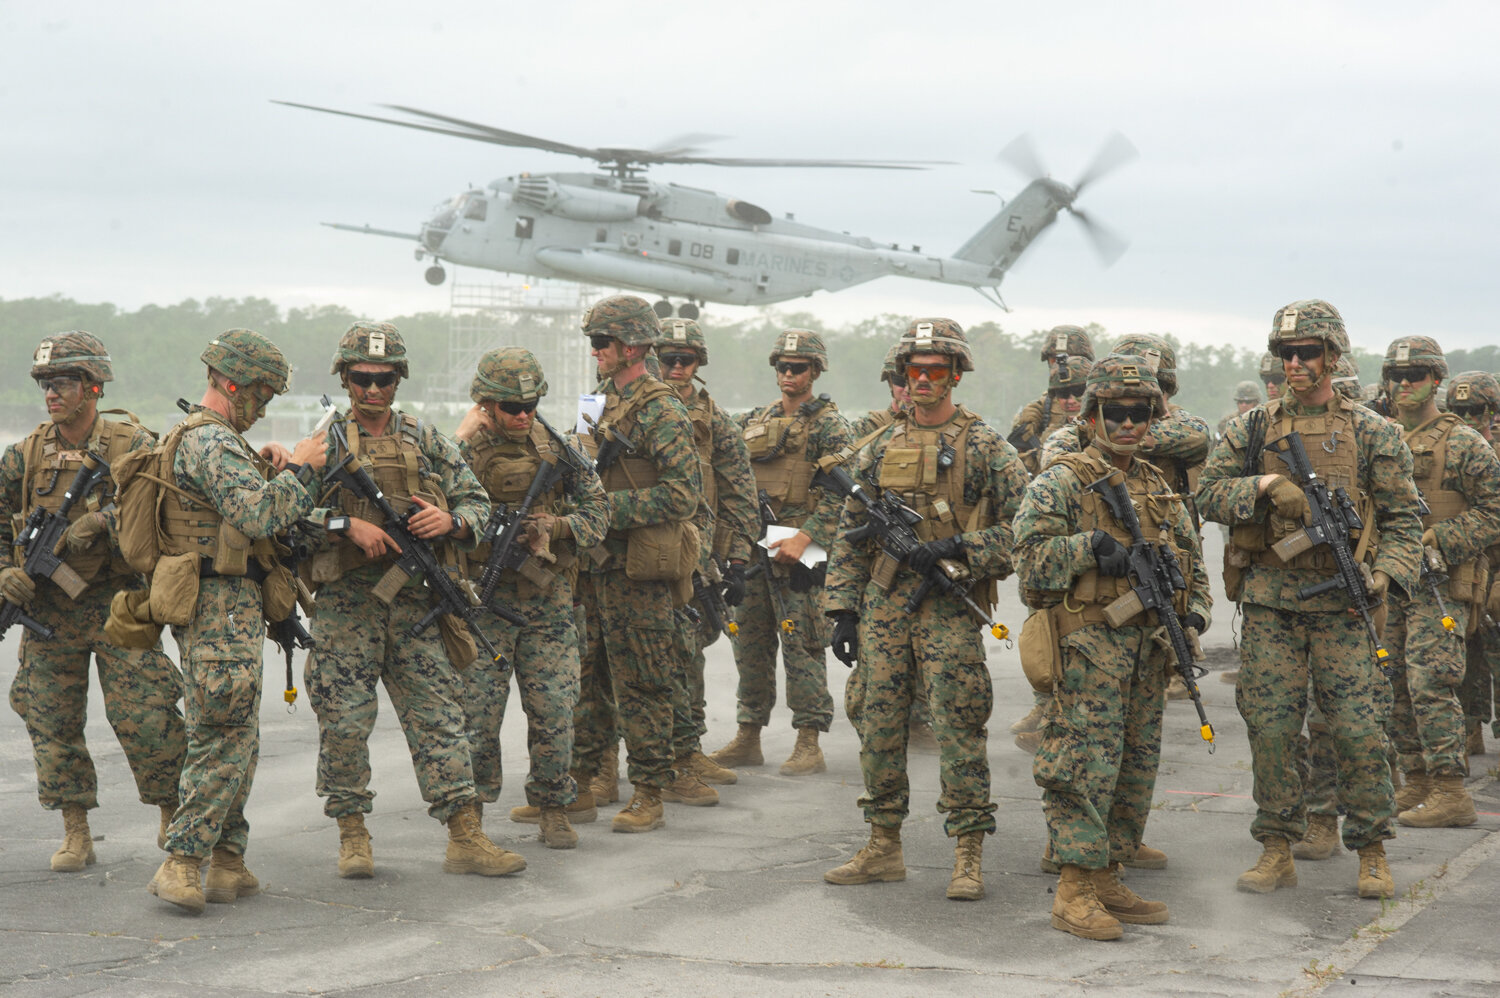  U.S. Marines of the 2nd Marine Division wait to board CH-53 Stallion and MV-22 Osprey helicopters as part of what Lieutenant Colonel Darrel Ayers called the largest air assault exercise on the east coast in approximately 10 years, June 13, 2019. 